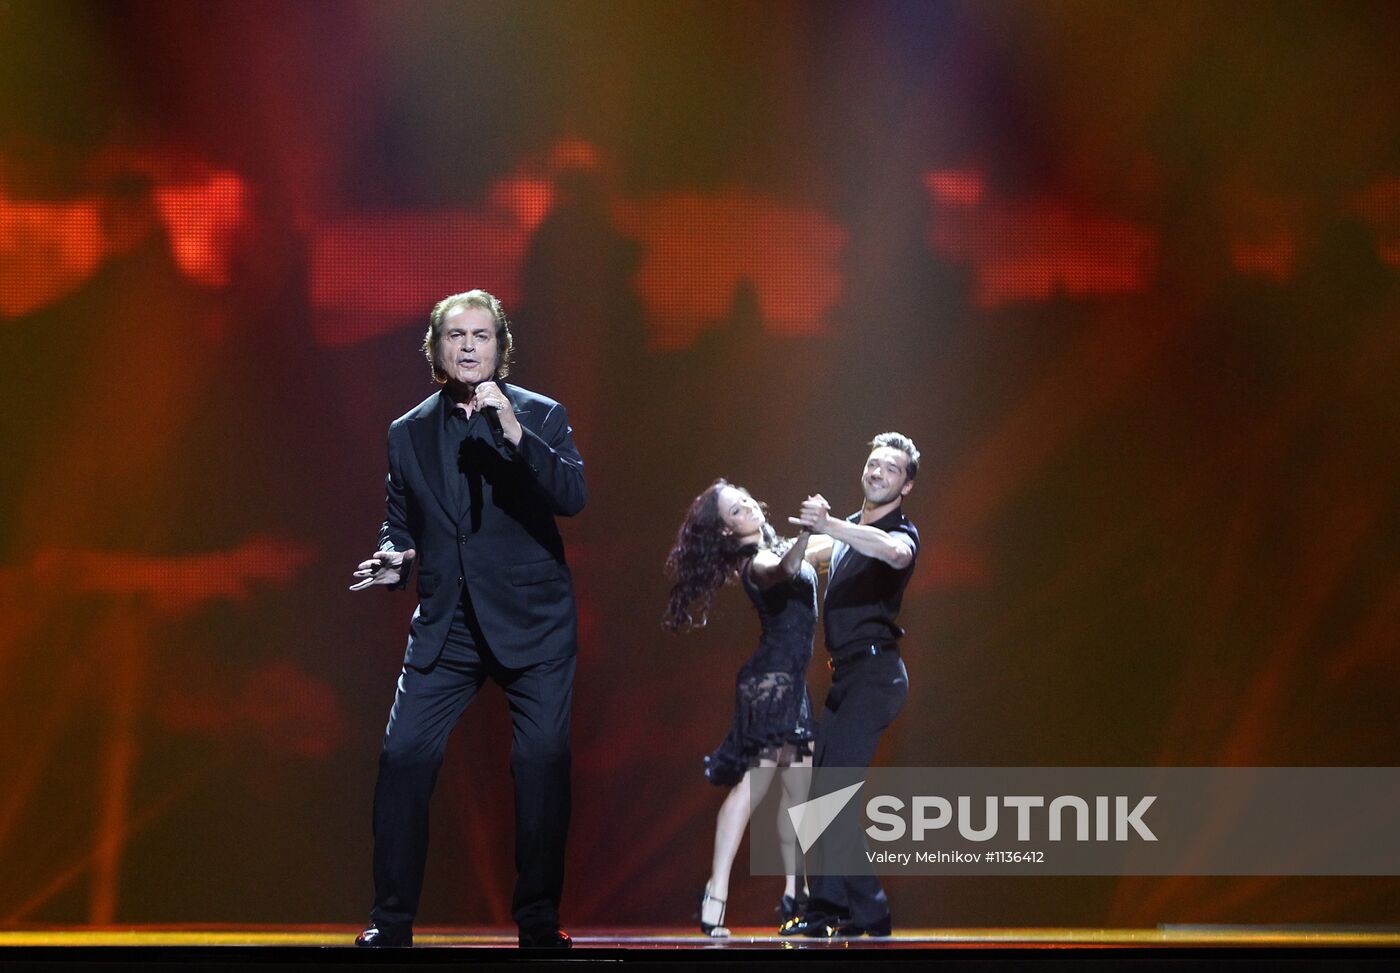 Full rehearsal for final show of Eurovision 2012 contest